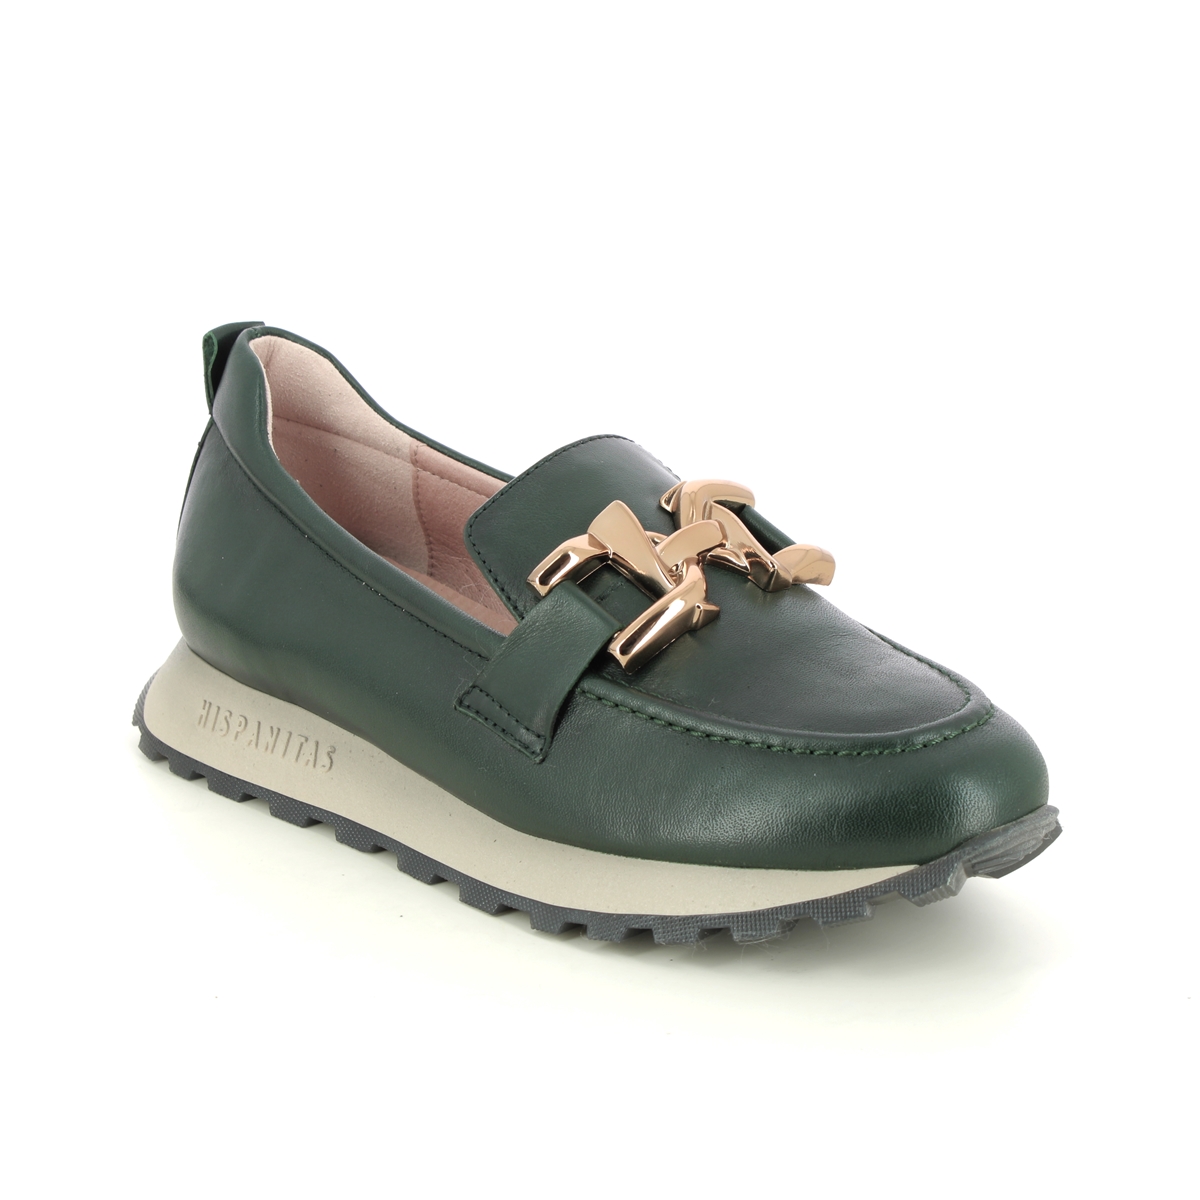 Hispanitas Loira Loafer Green Womens loafers HI232962-91 in a Plain Leather in Size 39